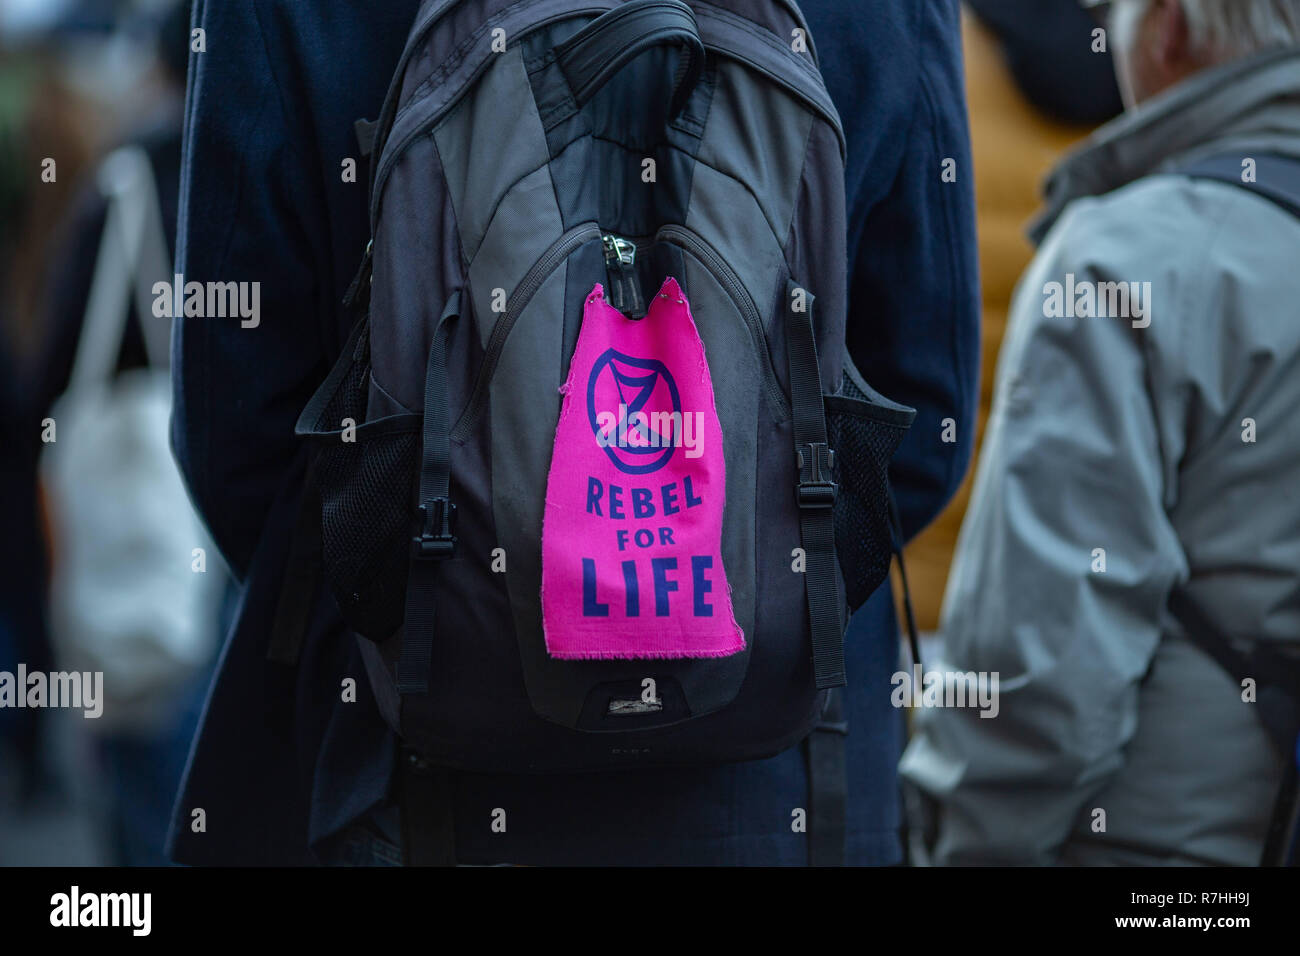 London, UK. 9th Dec, 2017. An Anti-Facist demonstrator wearing a 'Rebel For Life' patch on his bag. This patch is associated with the 'Extinction Rebellion' activist group. 3,000 Pro-Brexit demonstrators and 15,000 Anti-Facist counter demonstrators took to the streets of London to voice their stance on the deal ahead of the key Brexit vote in parliament this Tuesday. Credit: Ryan Ashcroft/SOPA Images/ZUMA Wire/Alamy Live News Stock Photo